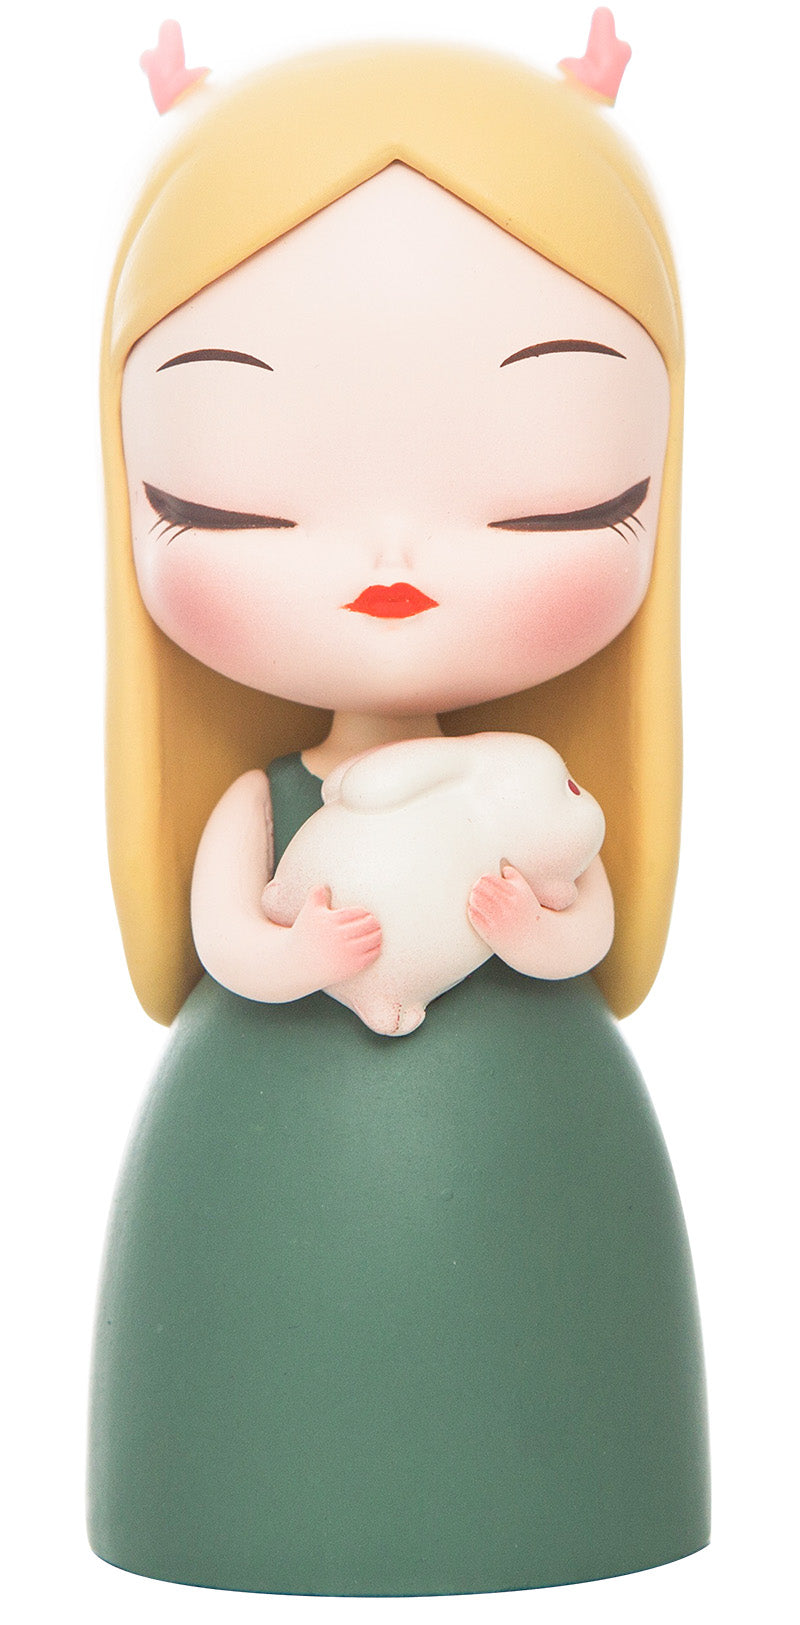 Dream of Fairy Tales-Goodnight Rabbit-Lite toy figurine of a girl holding a rabbit by Steven Jia.